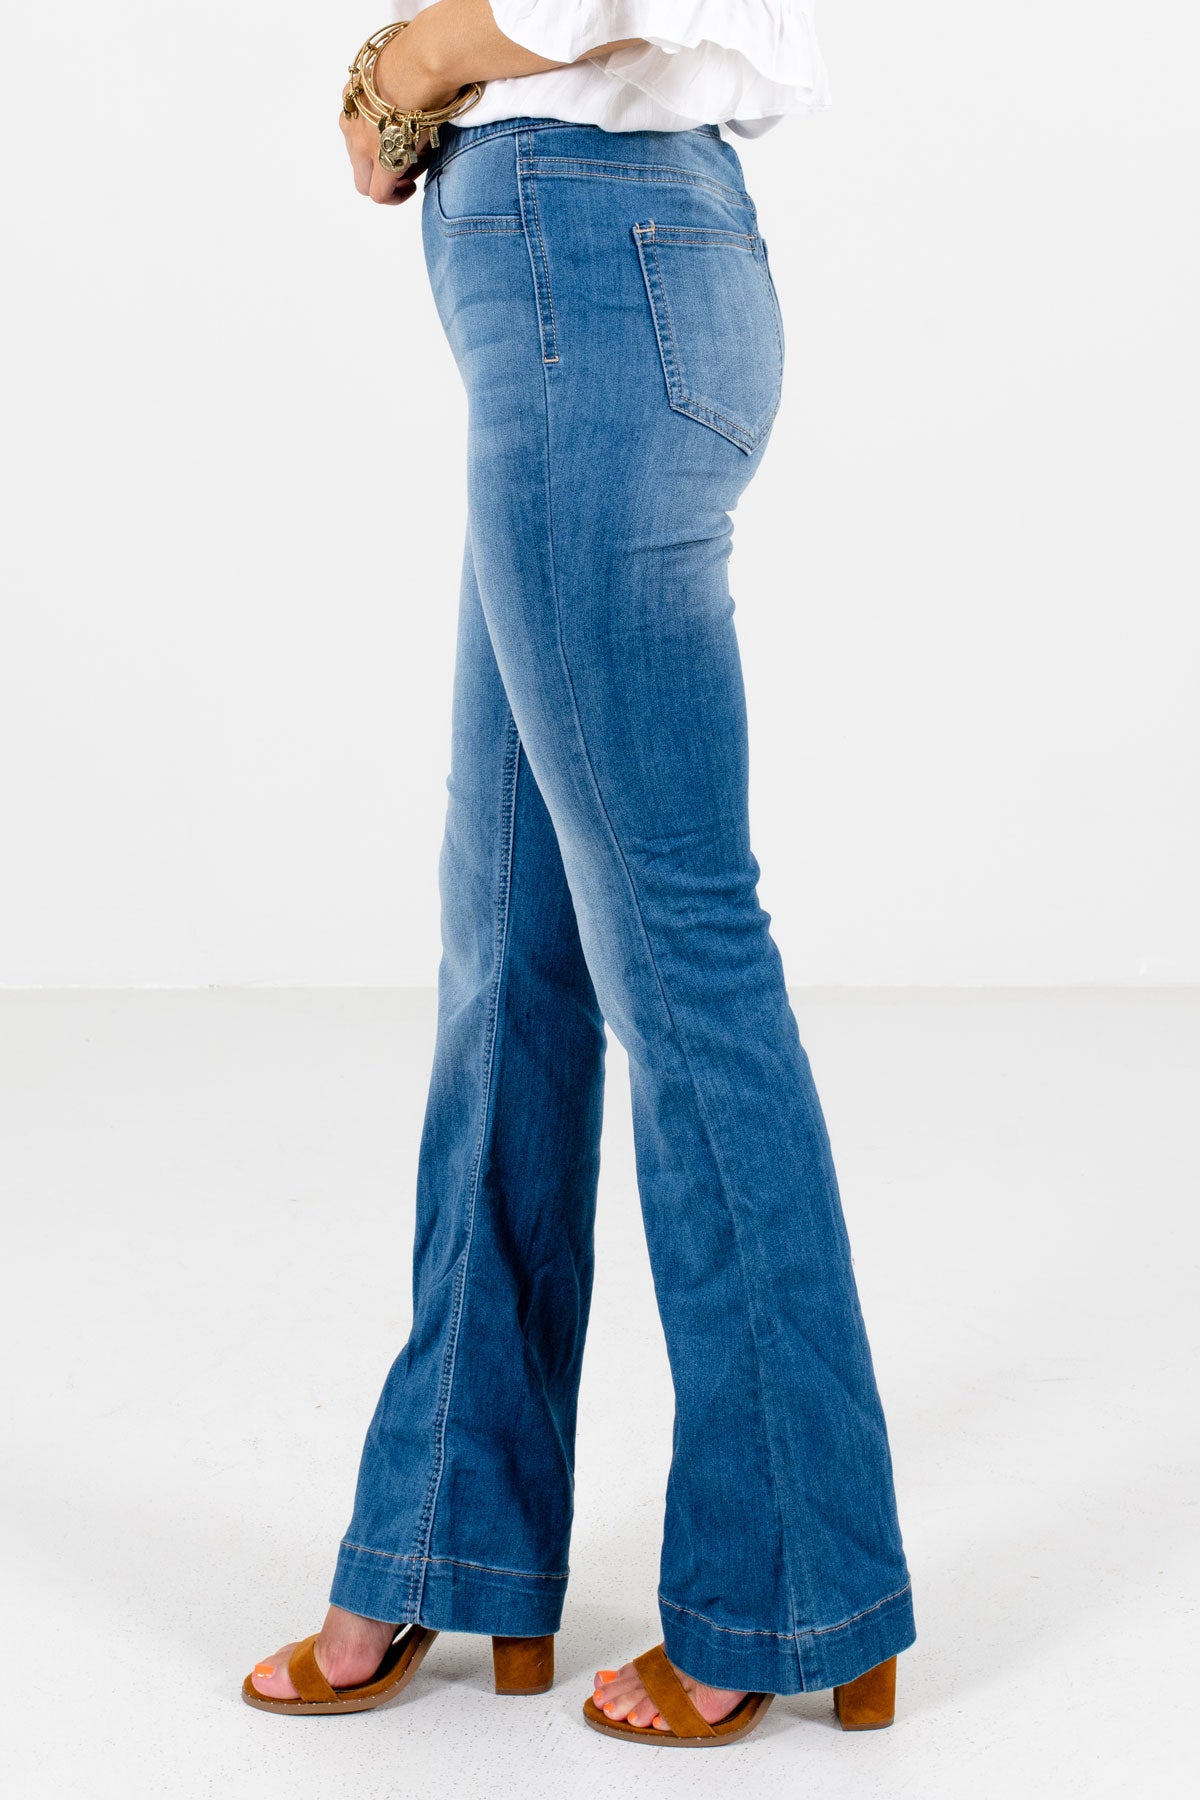 My Obsession Light Wash Blue Jeggings